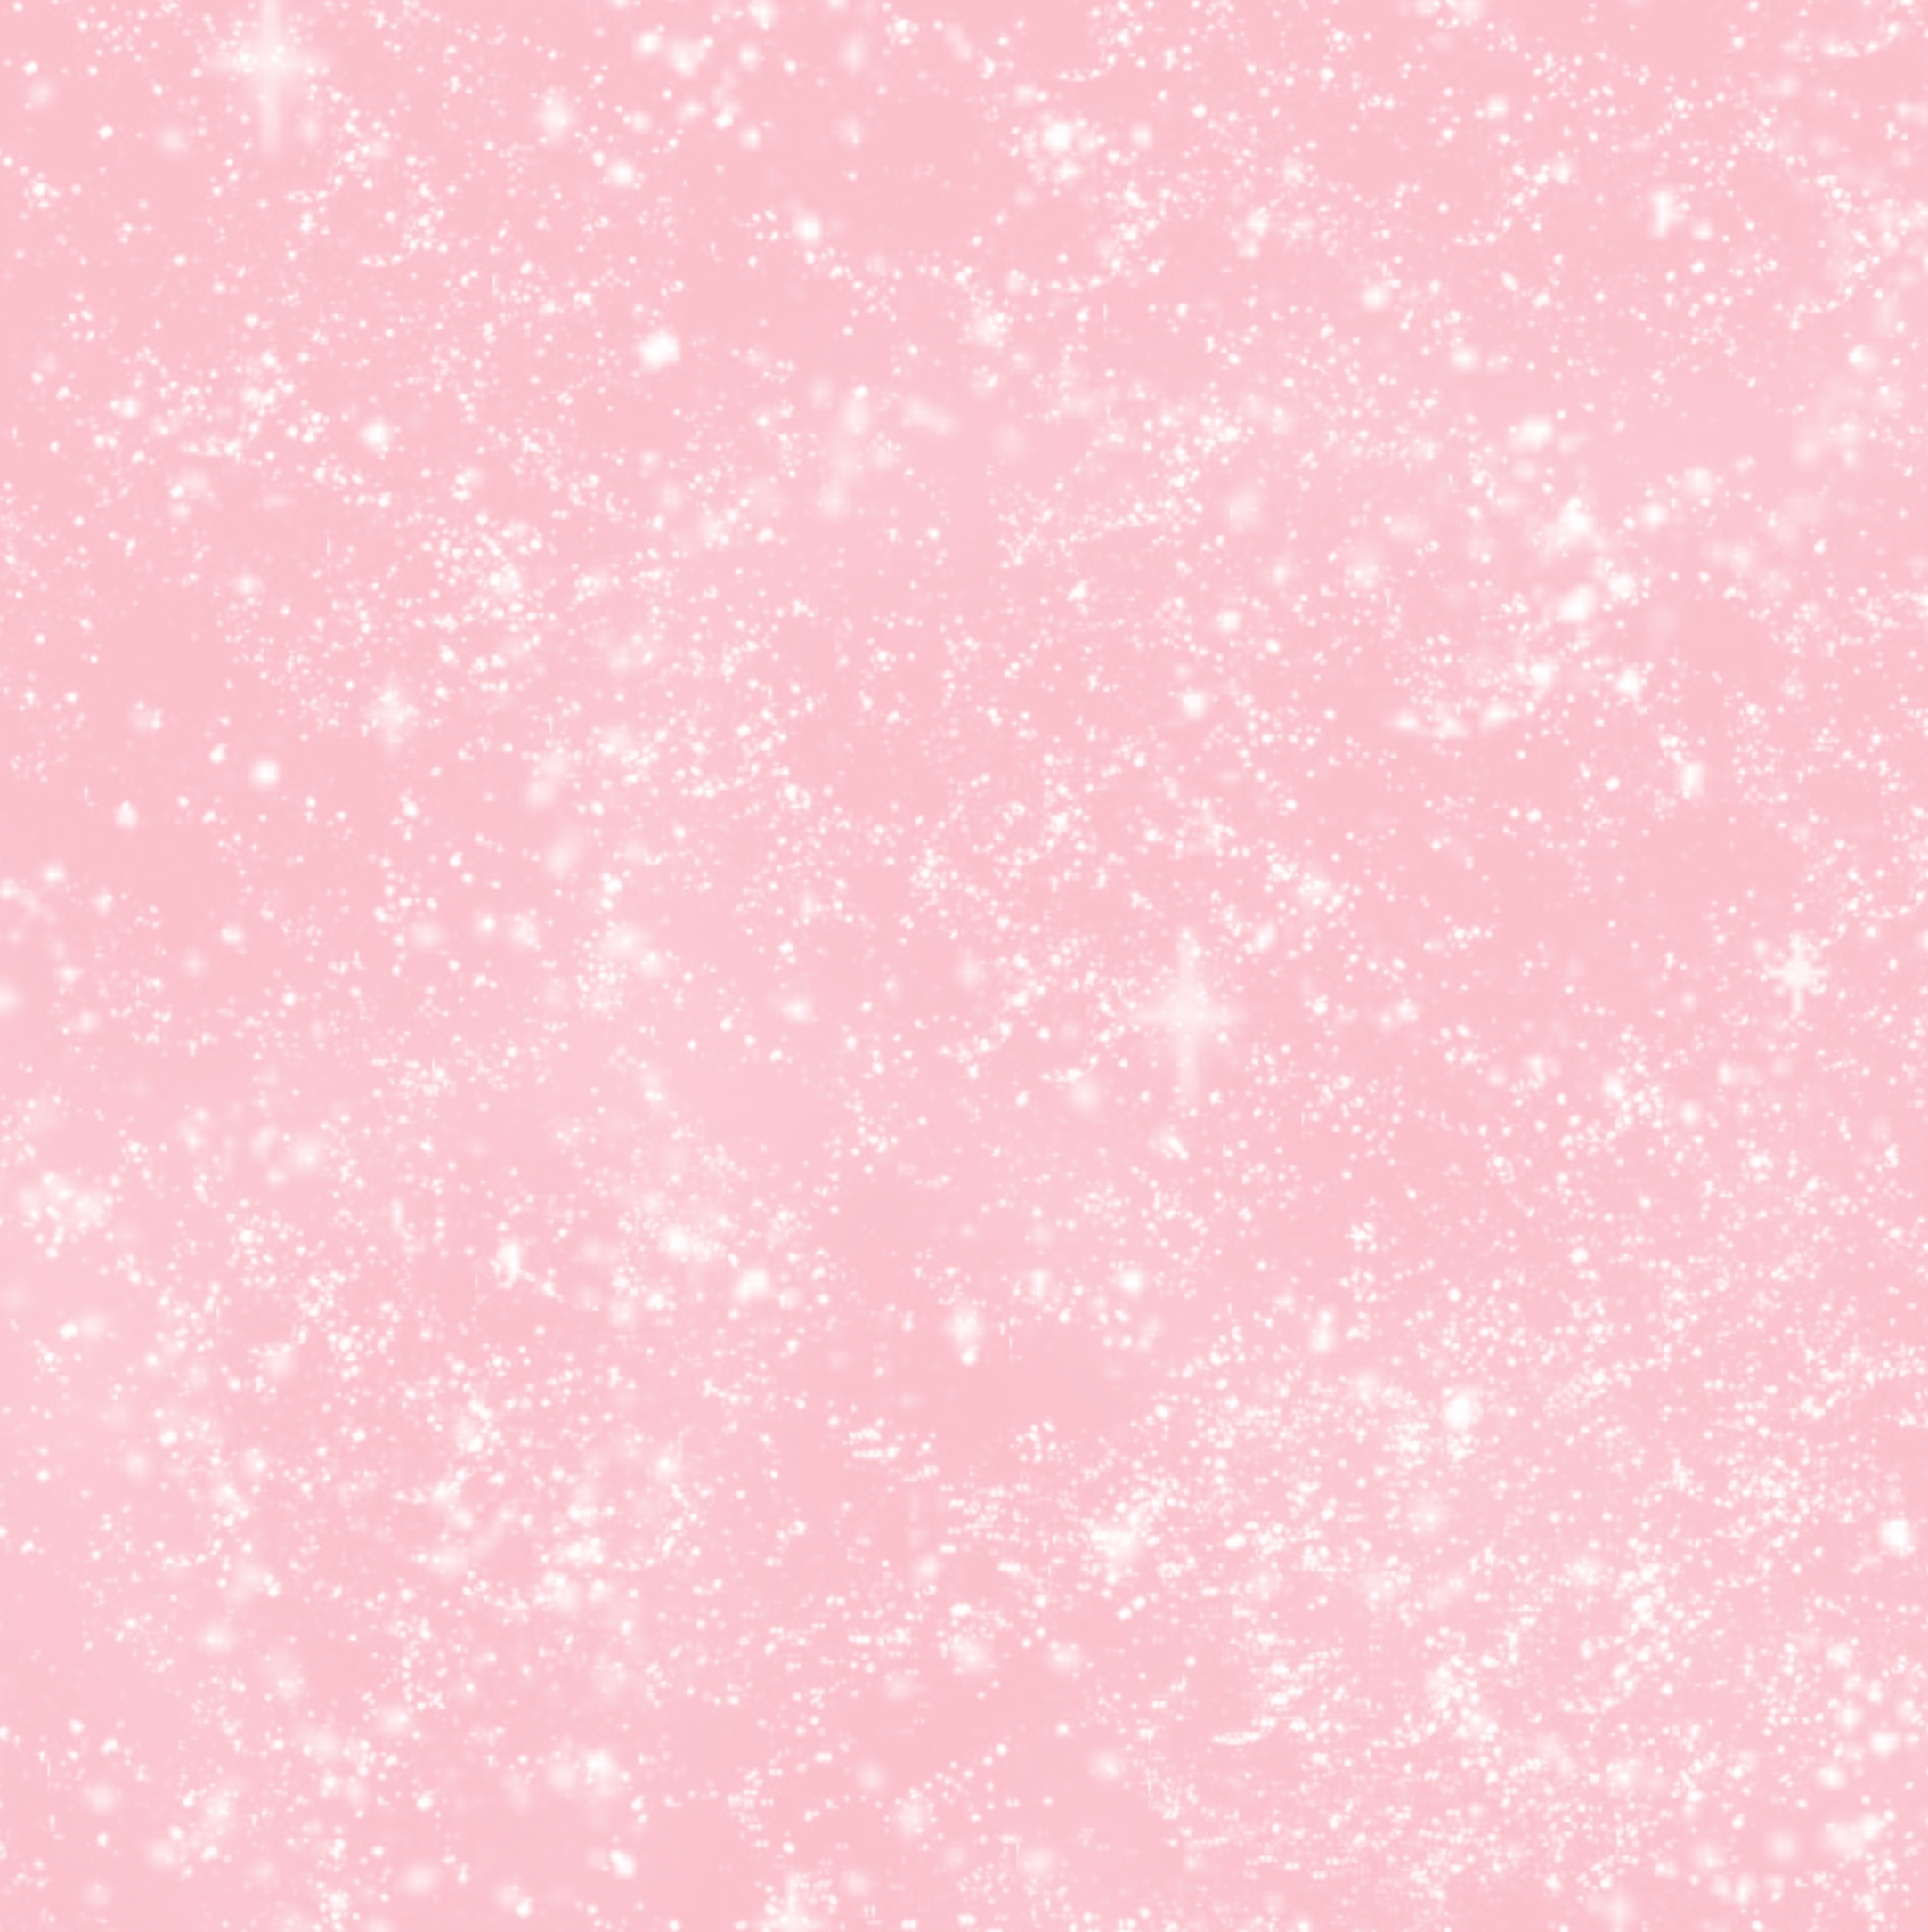 Pink Sparkly Background Image Pictures Becuo